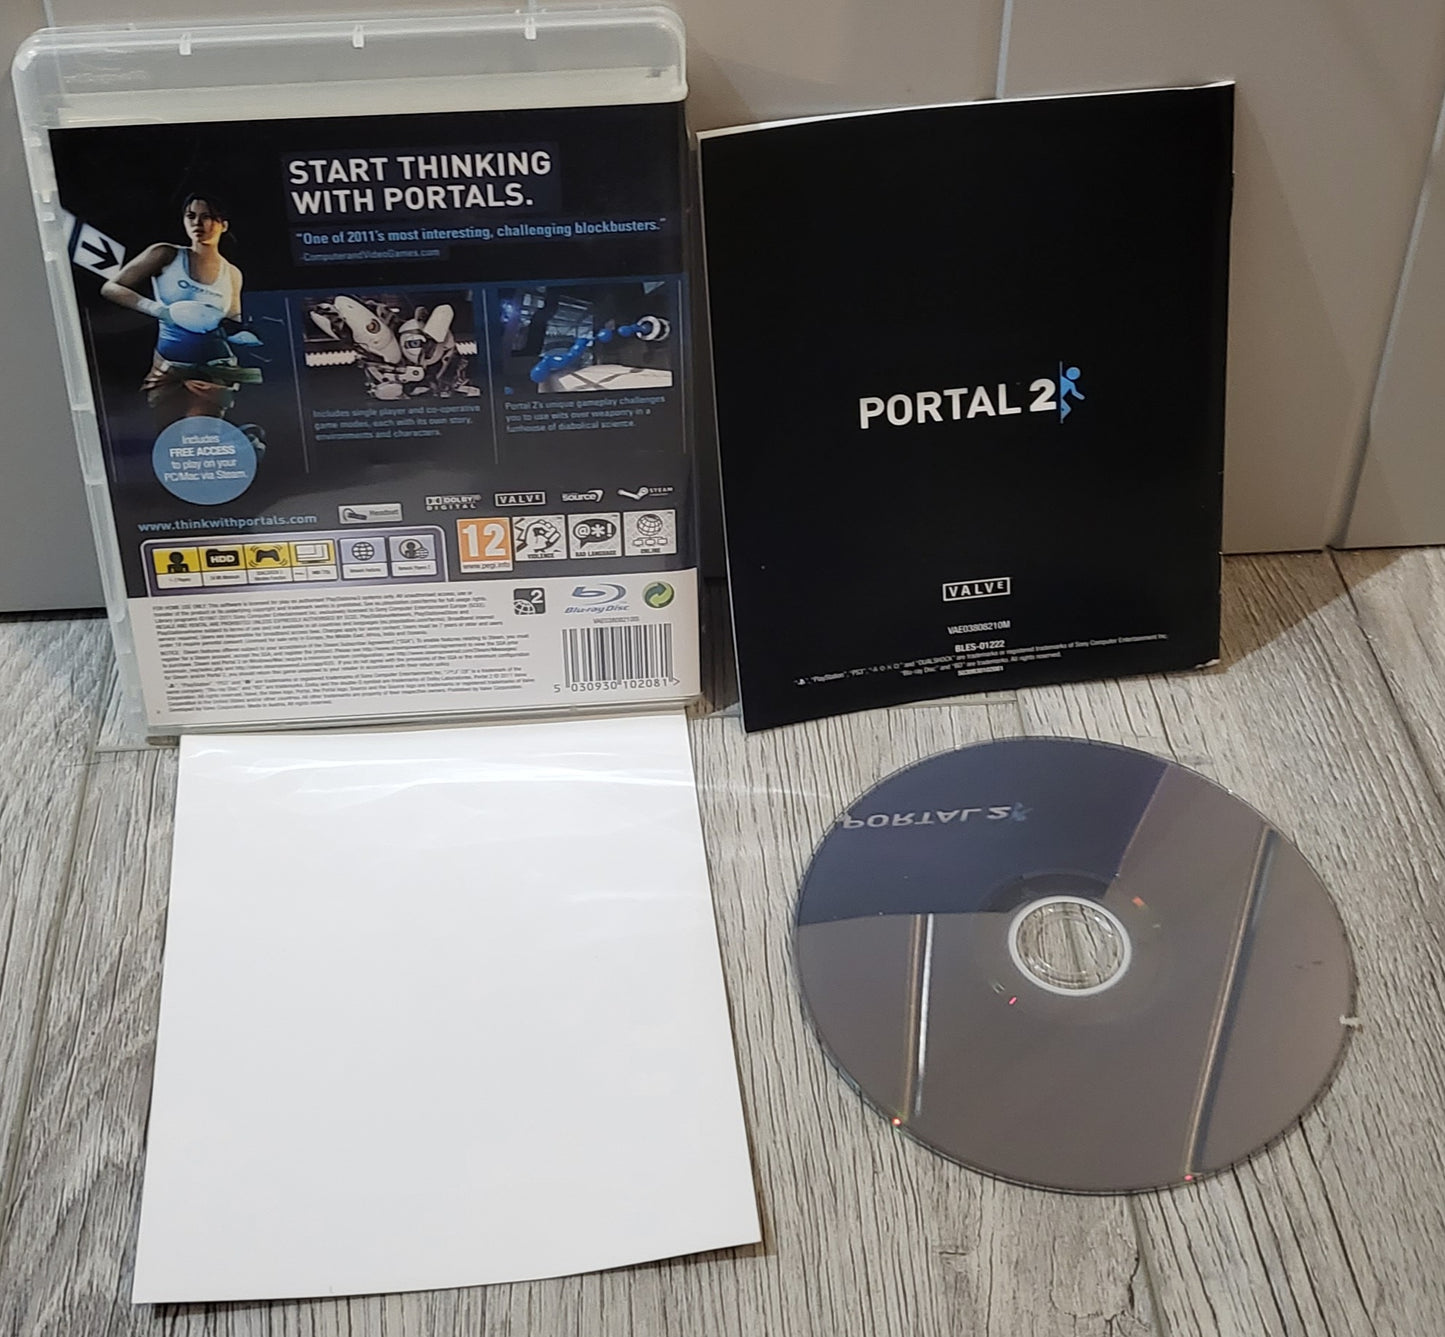 Portal 2 Sony Playstation 3 (PS3) Game